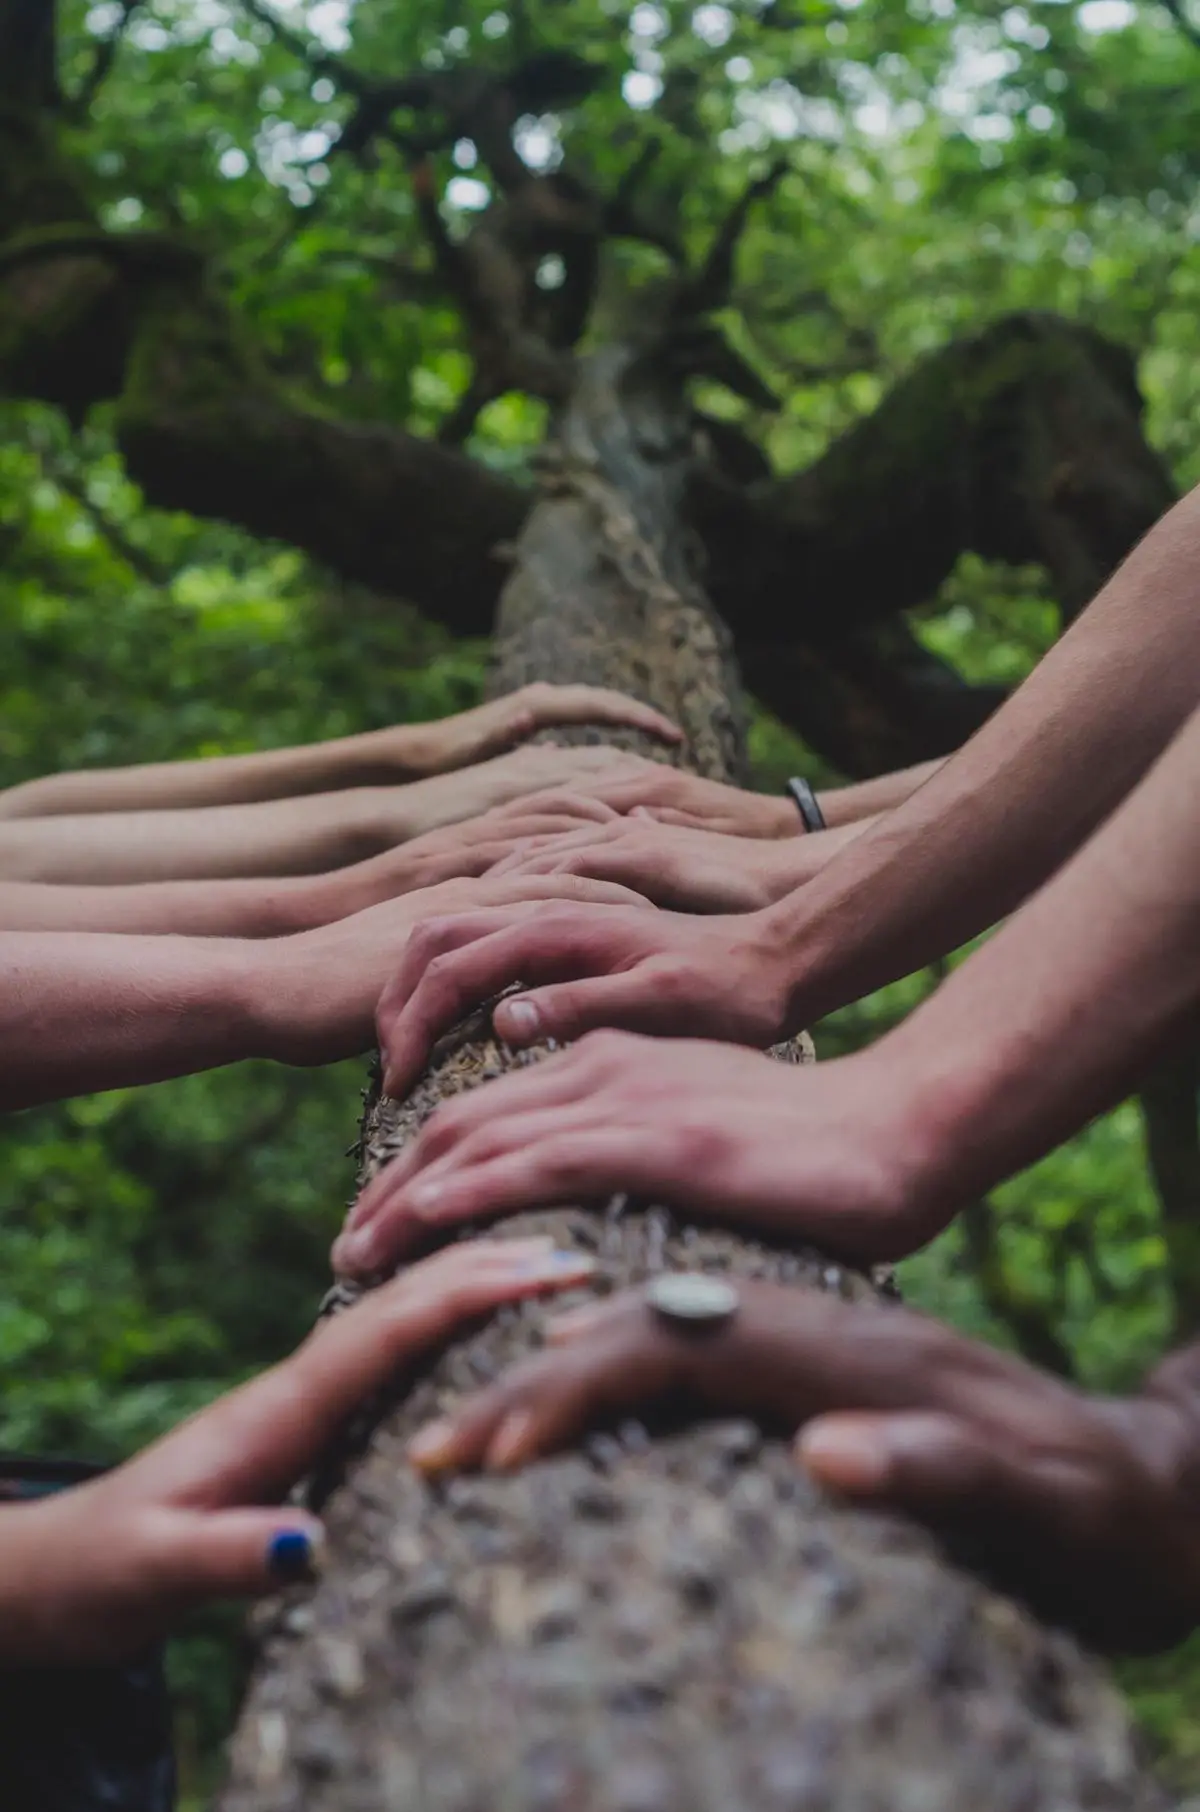 Image depicting a diverse group of people joining hands, symbolizing unity and the power of social justice movements.